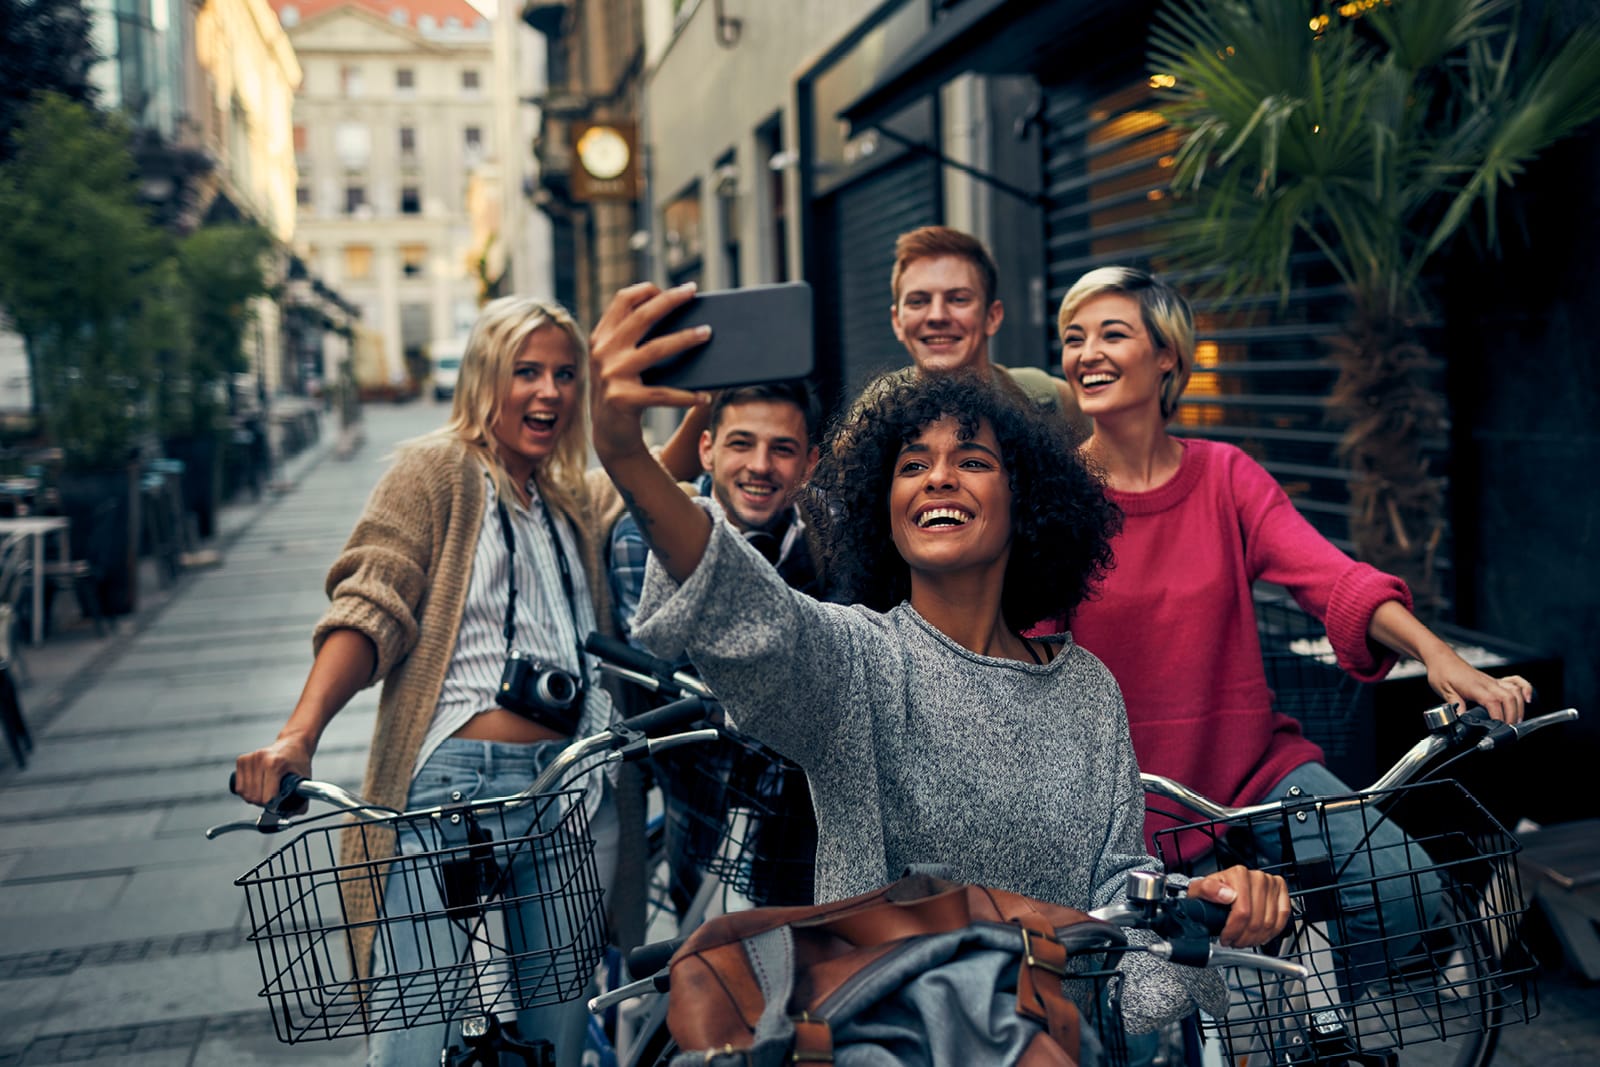 Group of people riding bikes and taking a selfie